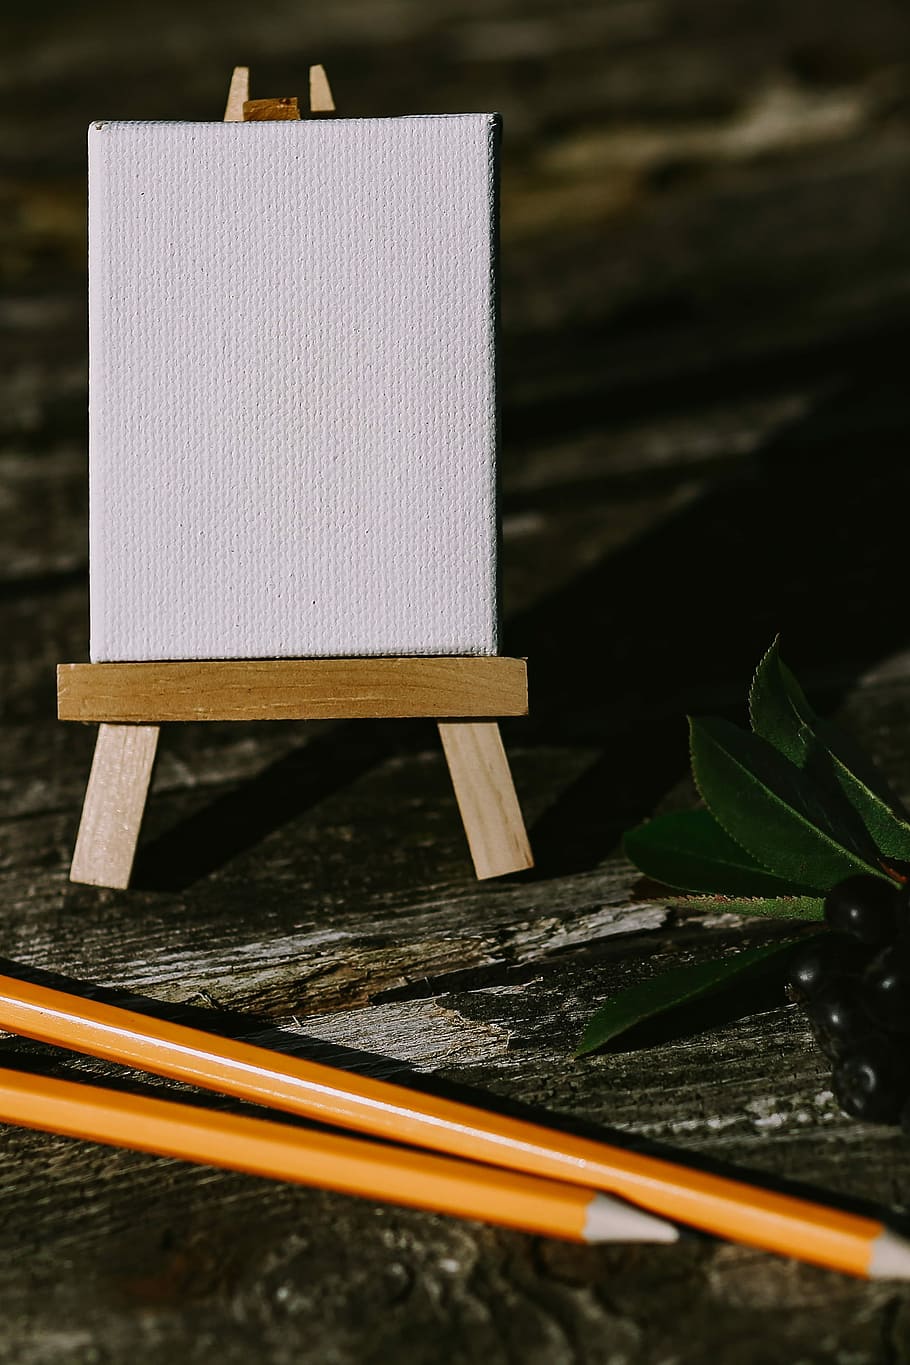 flowers, pencils, things, wood, Small, blueberries, wooden, berries, canvas, open space